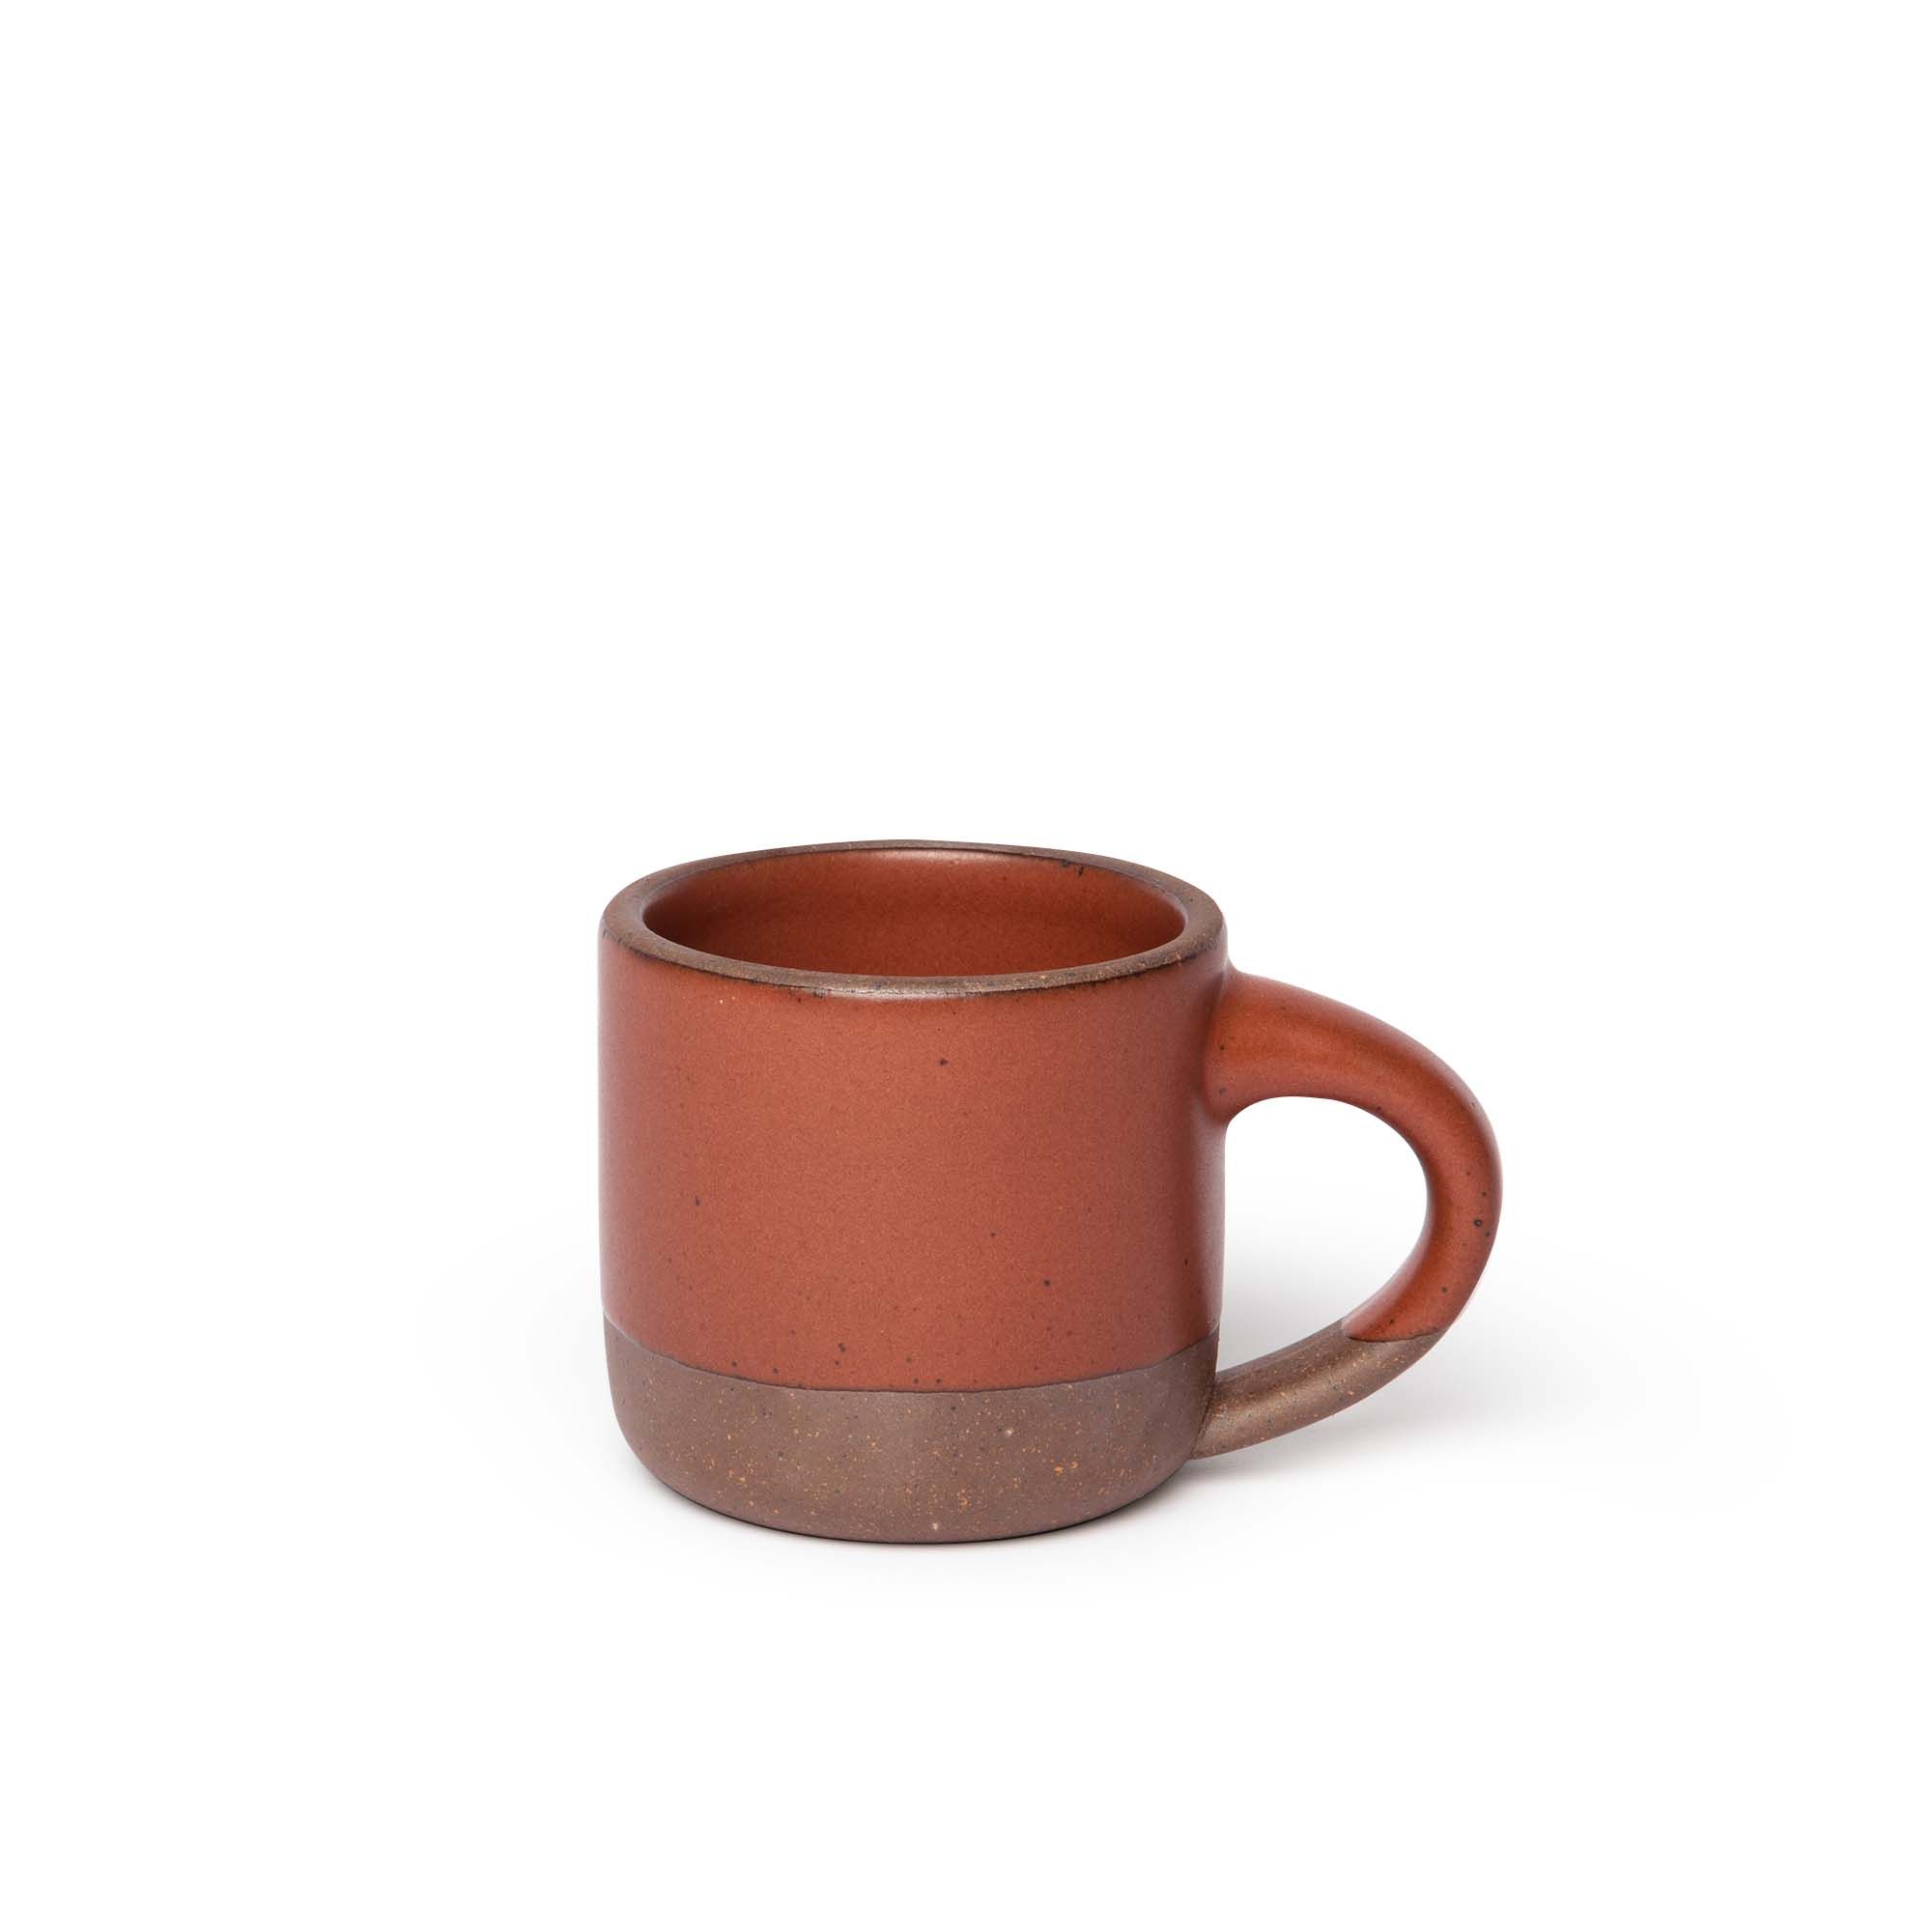 A small sized ceramic mug with handle in a cool burnt terracotta glaze featuring iron speckles and unglazed rim and bottom base.